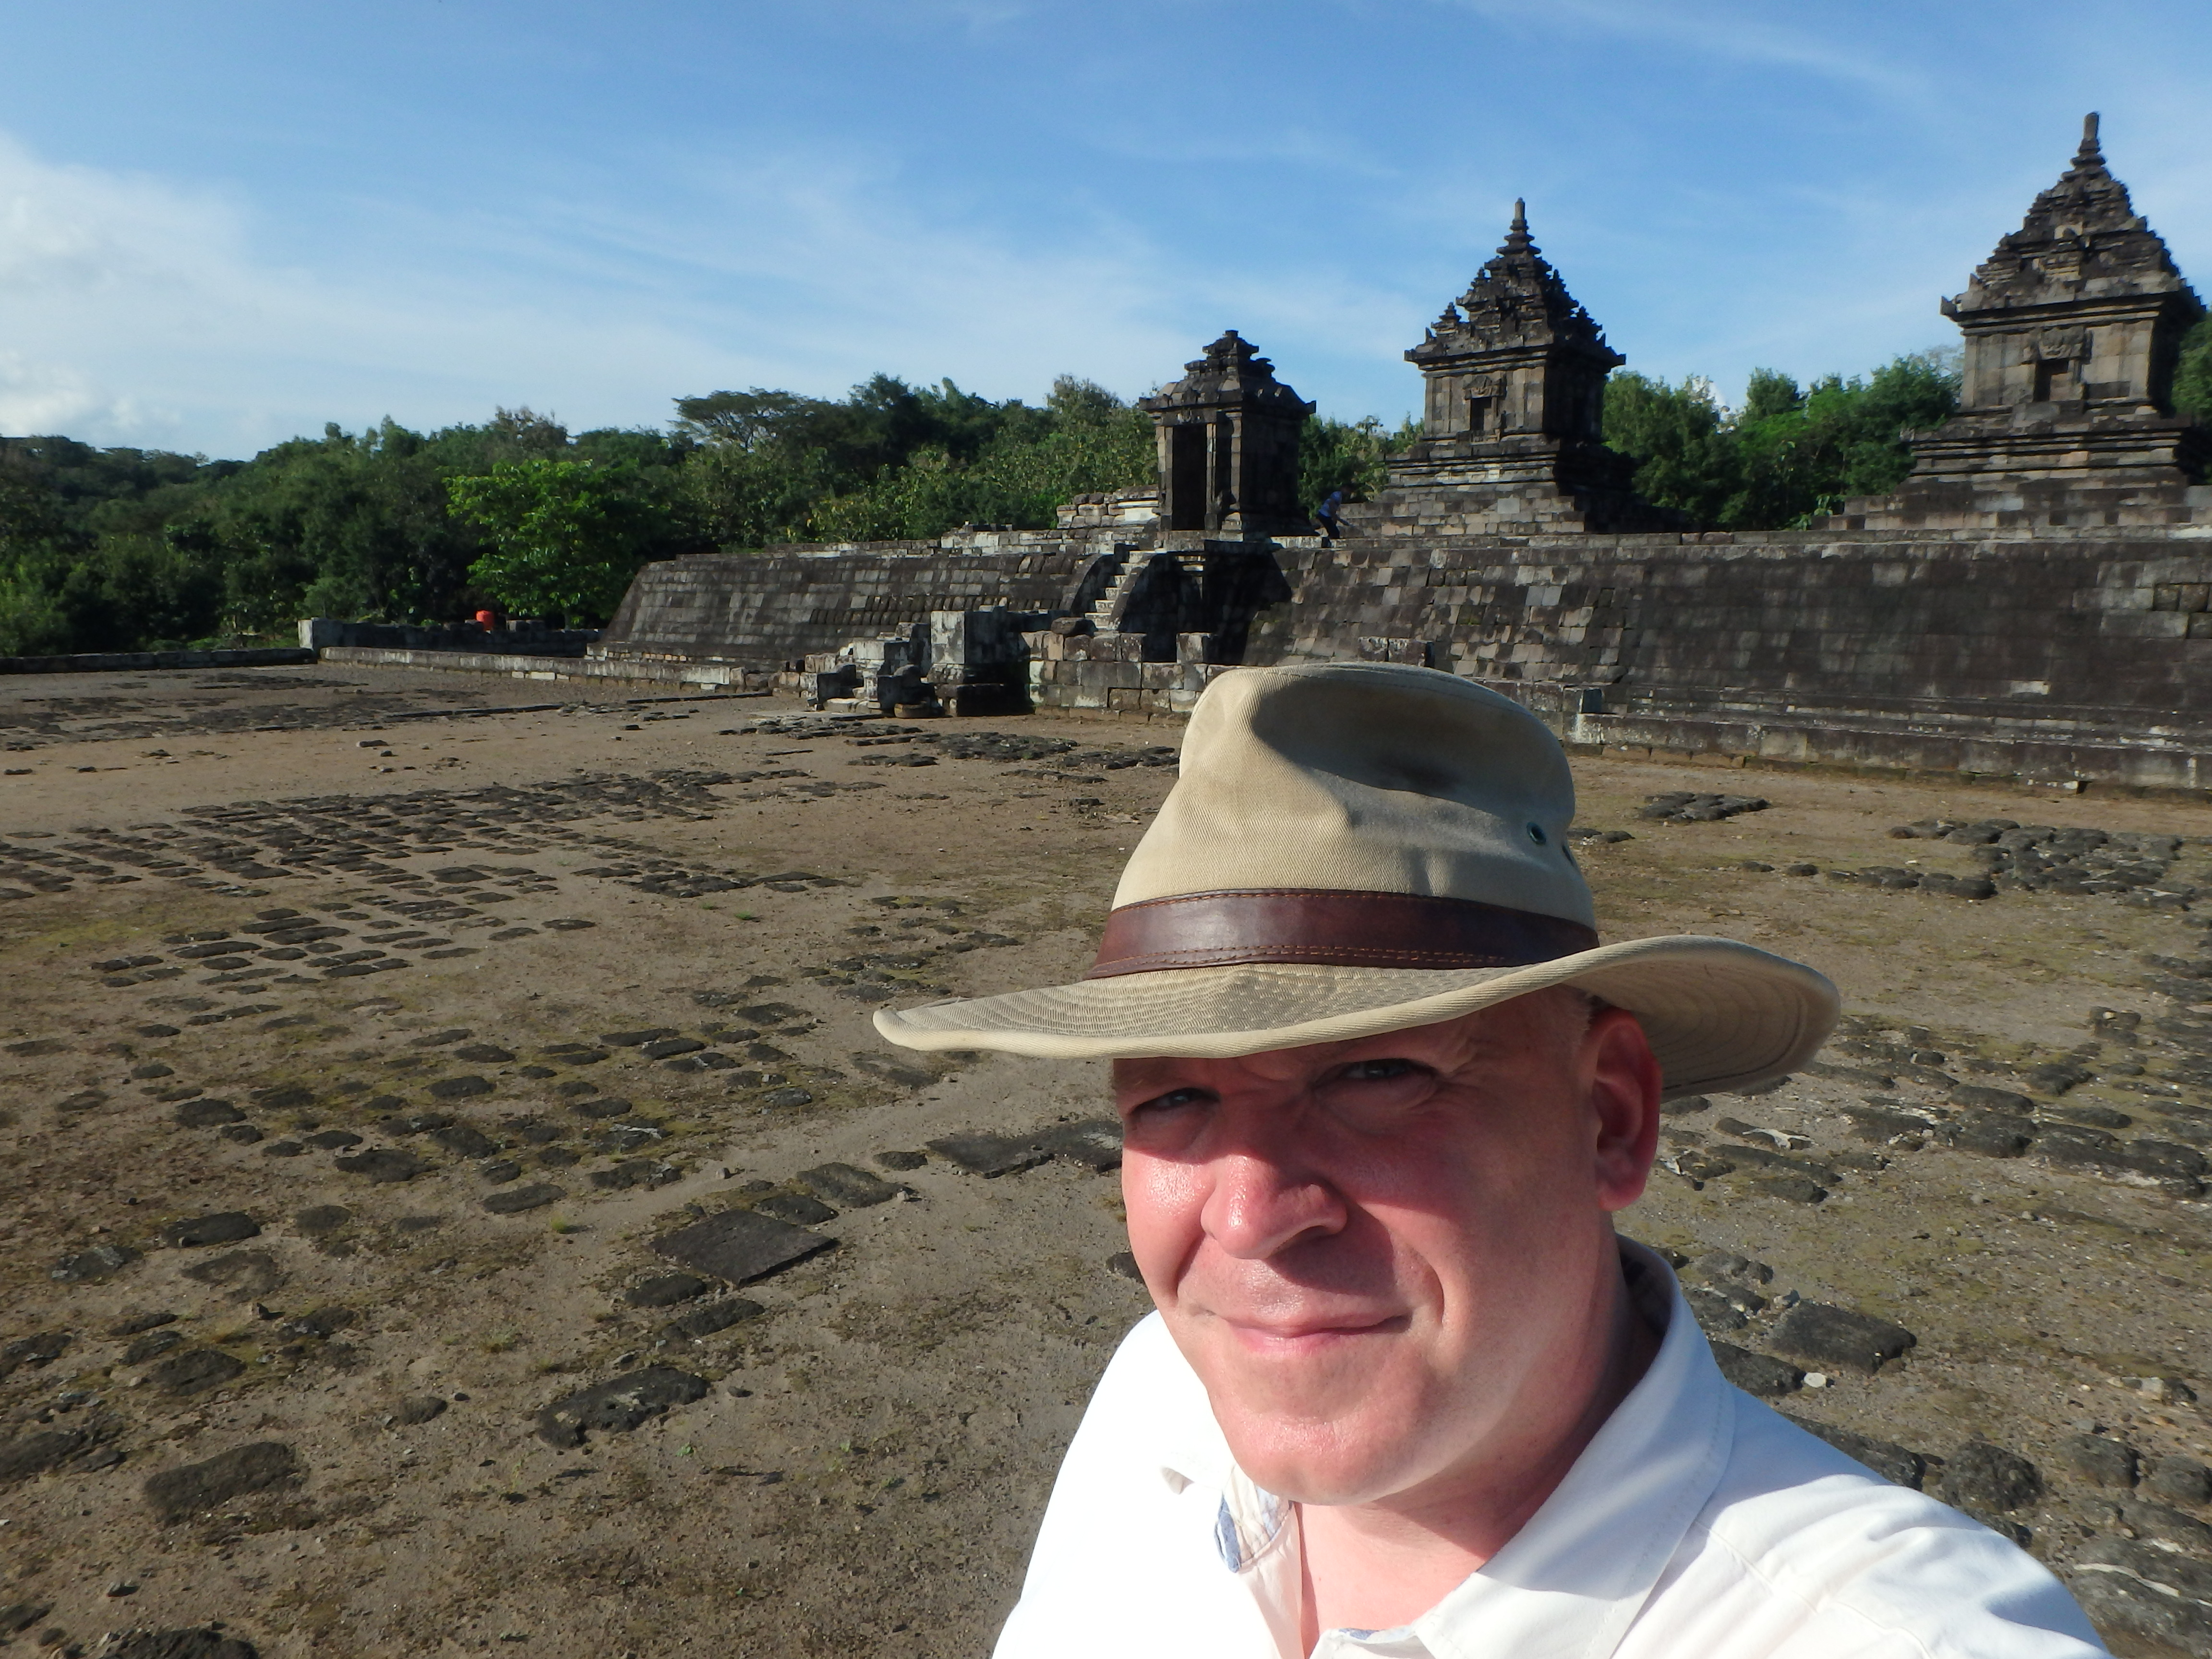 A self-taken photograph of a smiling wear wearing a hat and posing in front of ancient ruins